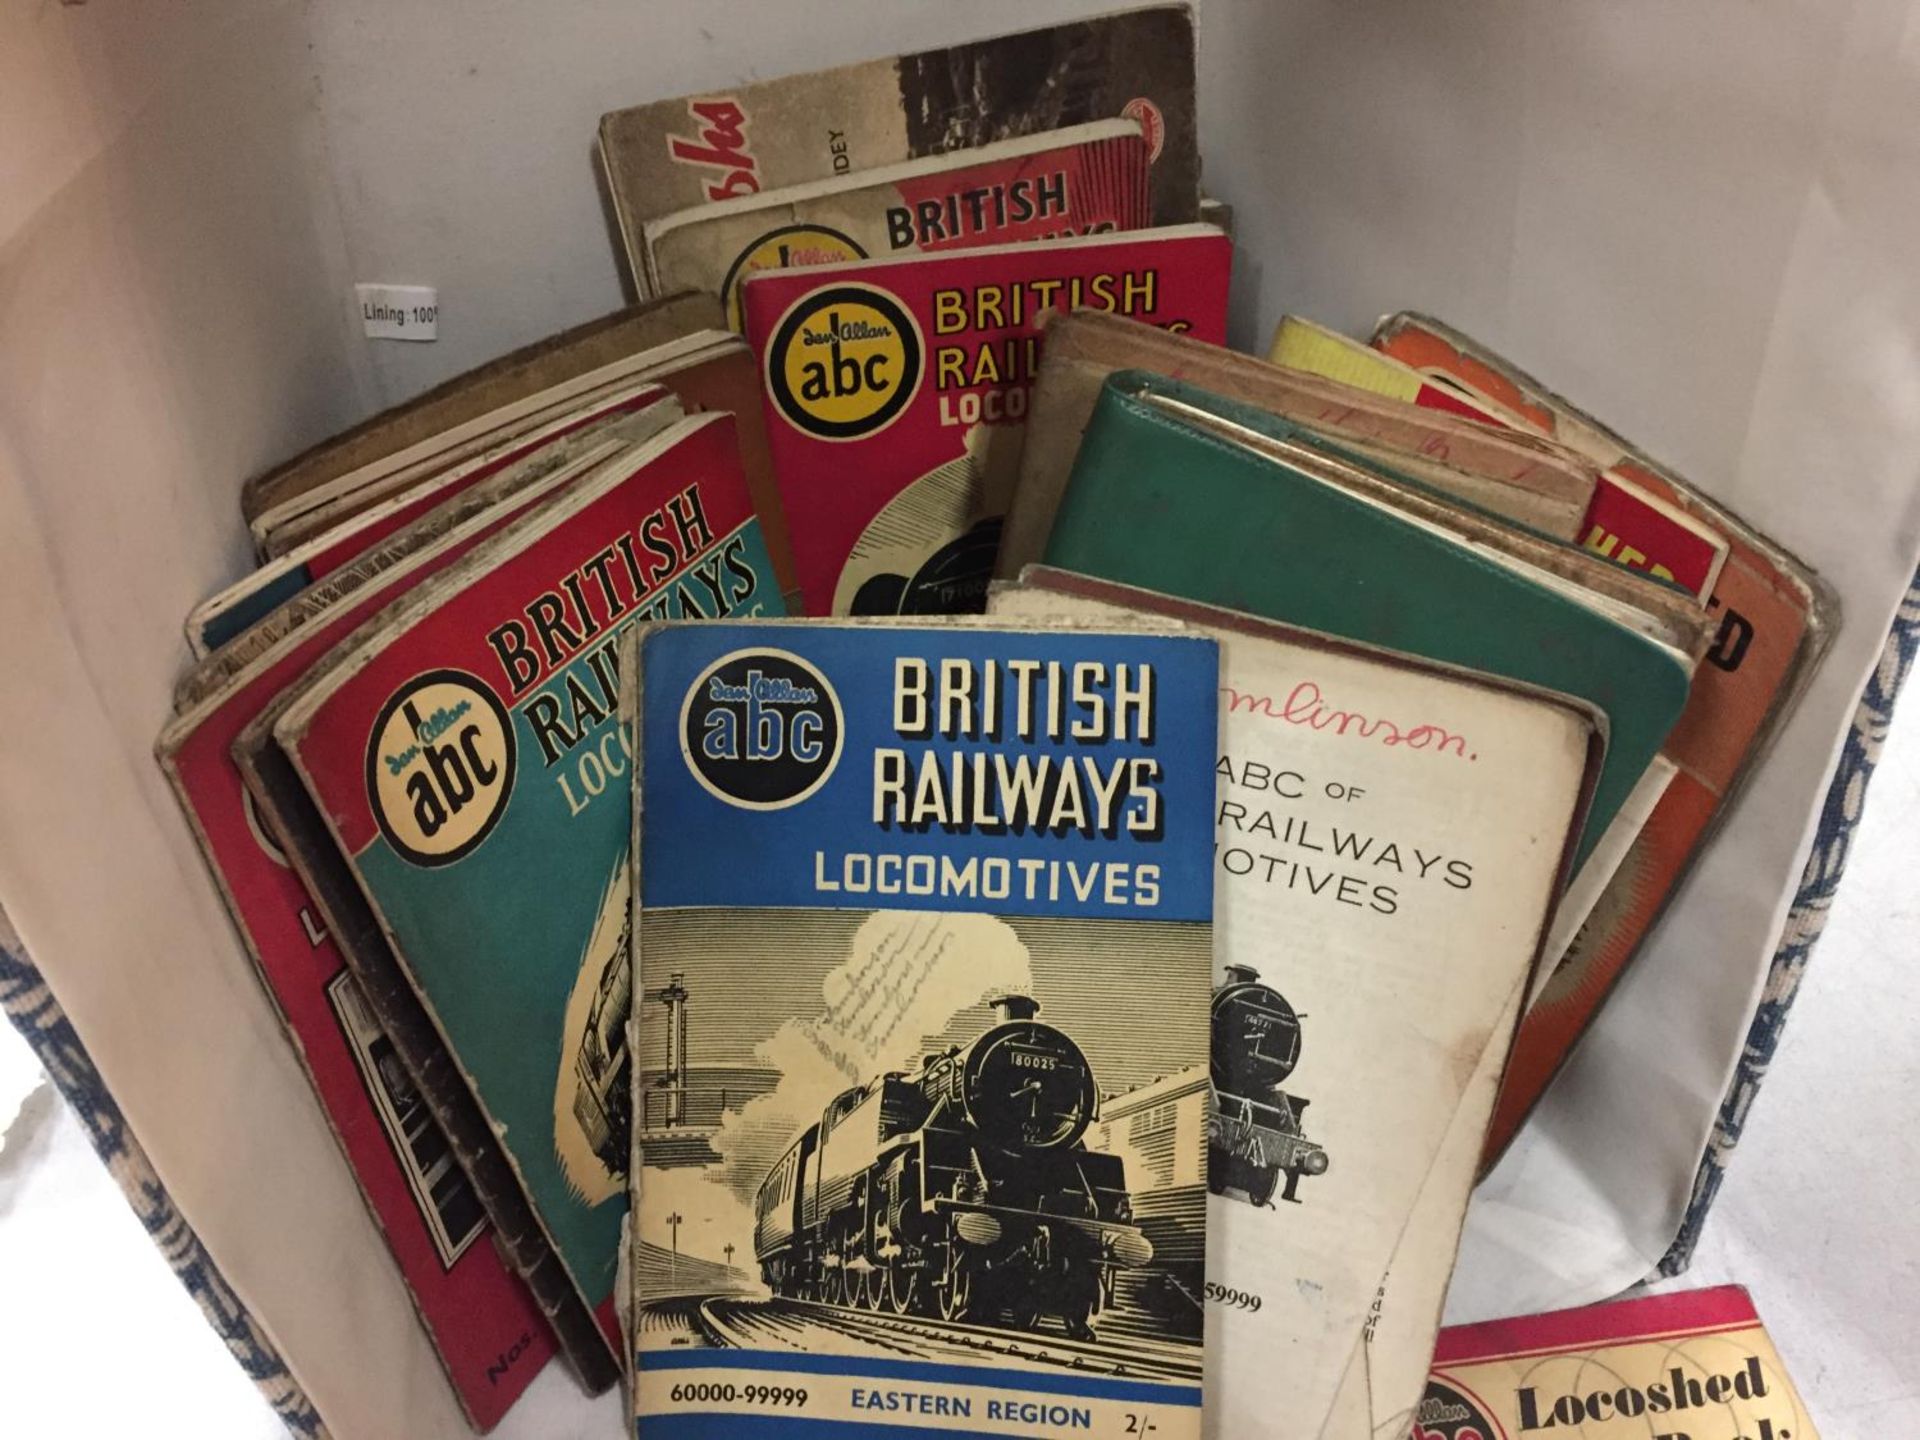 A NUMBER OF BRITISH RAILWAY LOCOMOTIVES TRAIN BOOKS - Image 4 of 4